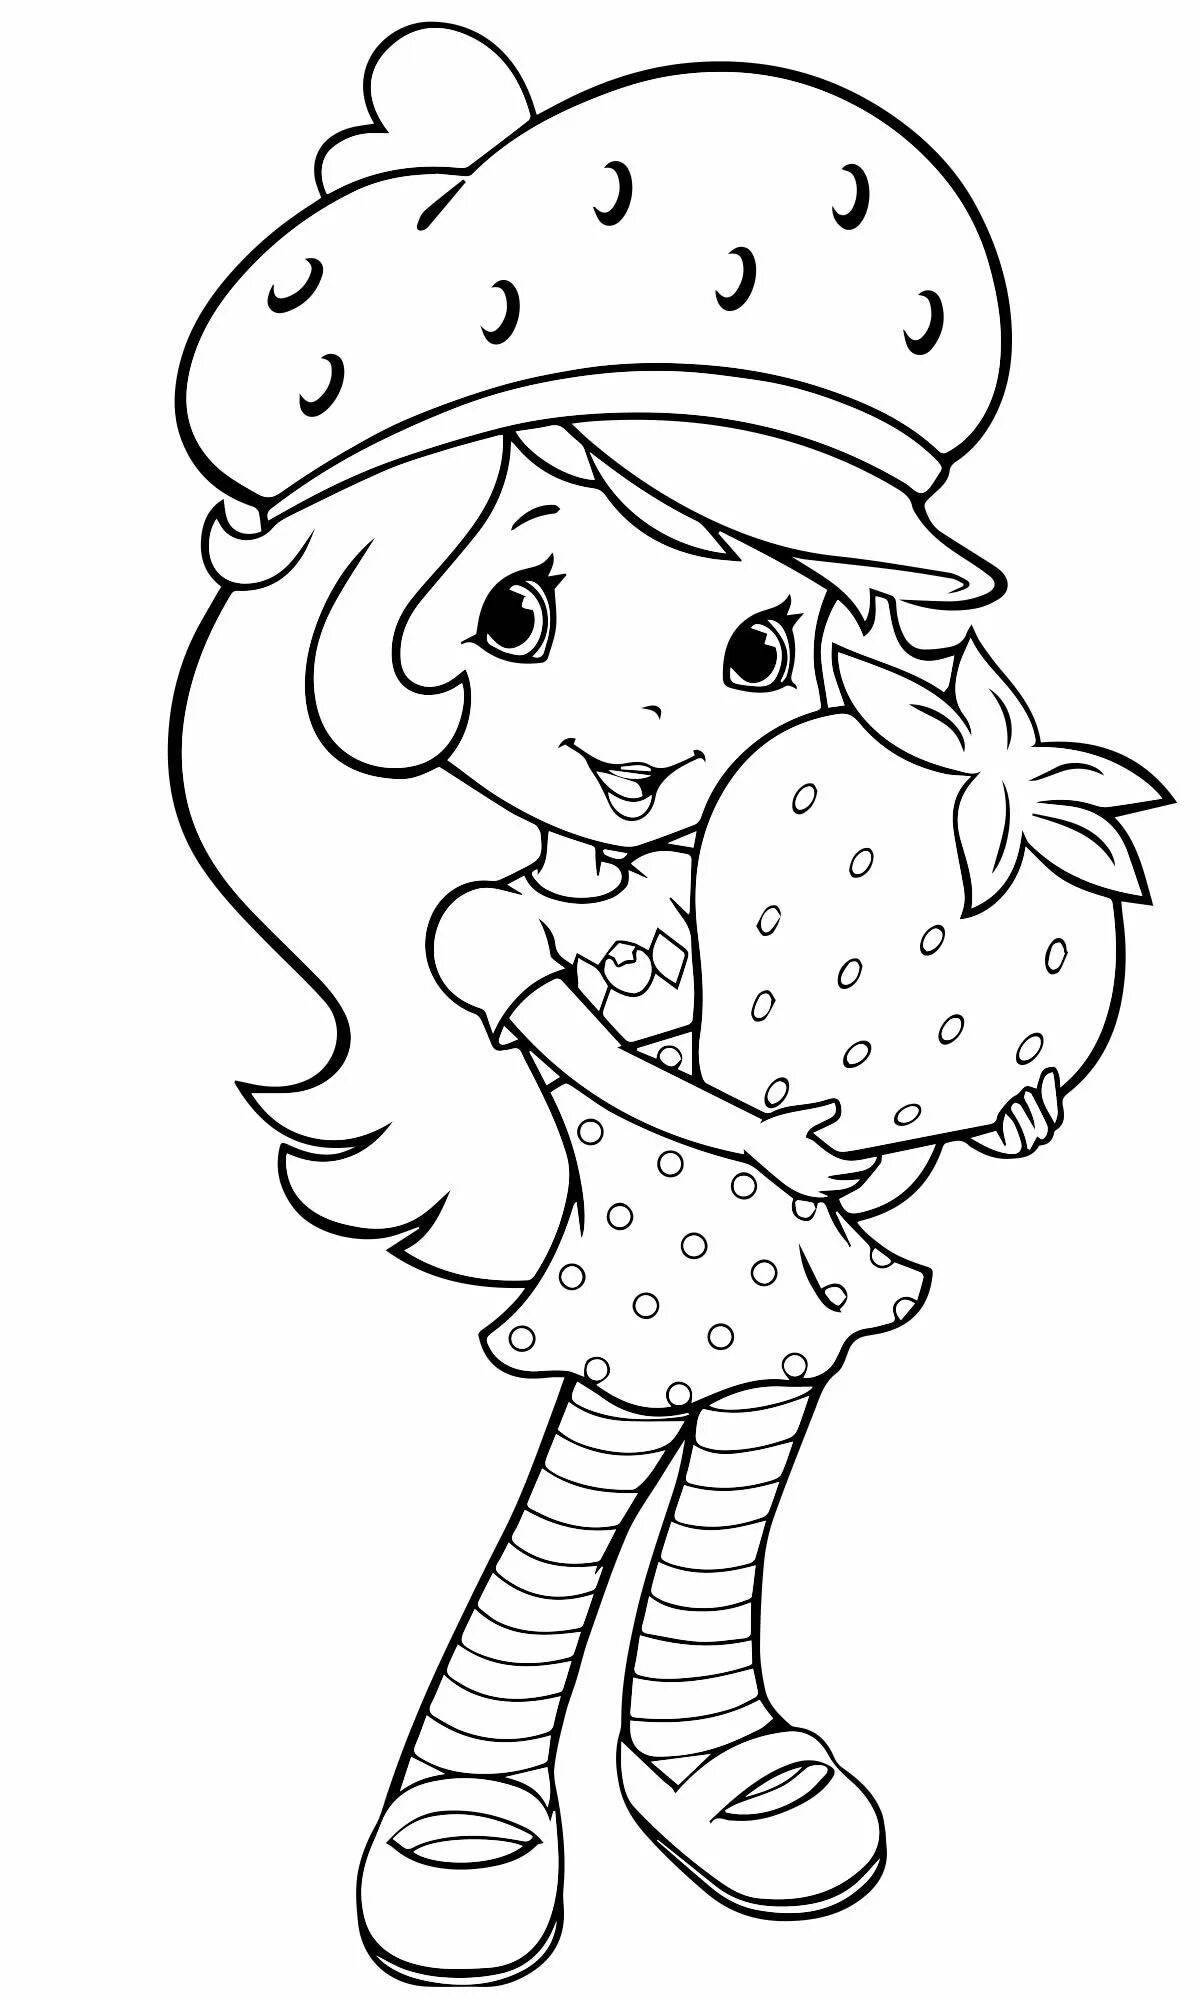 Glitter strawberry coloring page